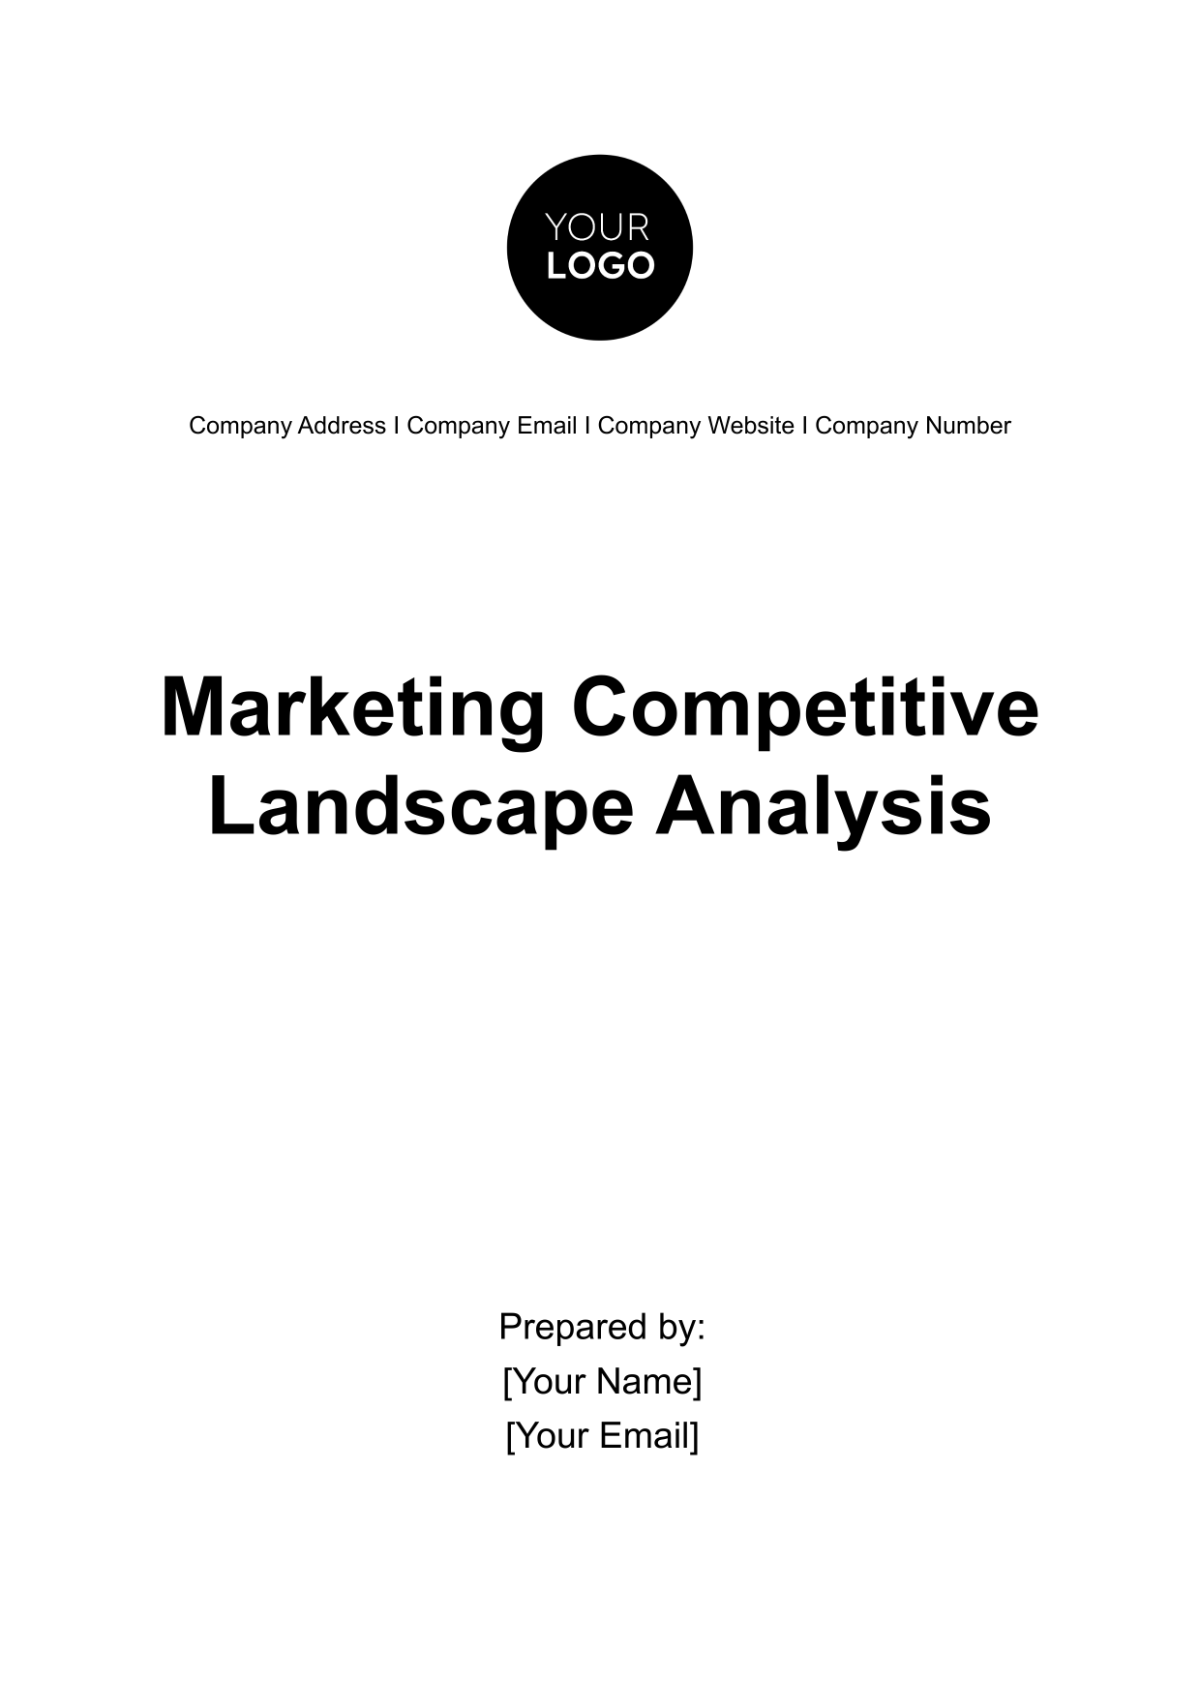 Marketing Competitive Landscape Analysis Template